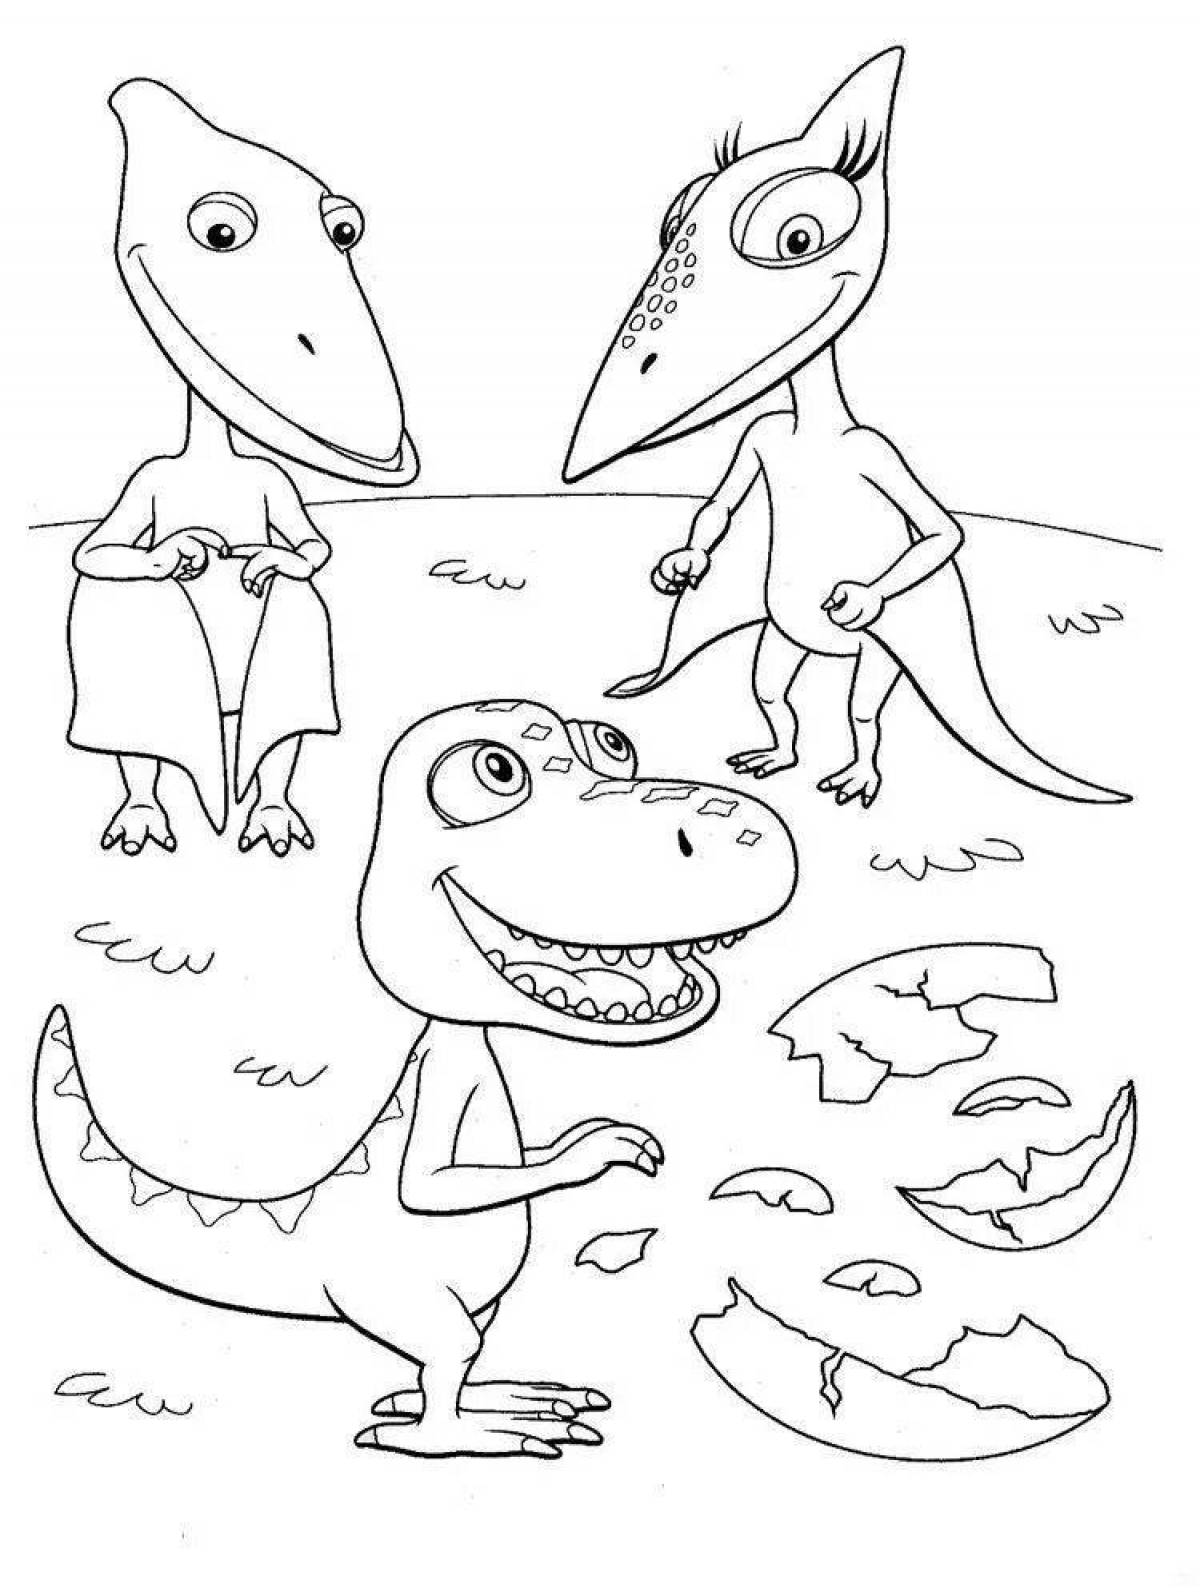 Exciting turbosaur coloring pages